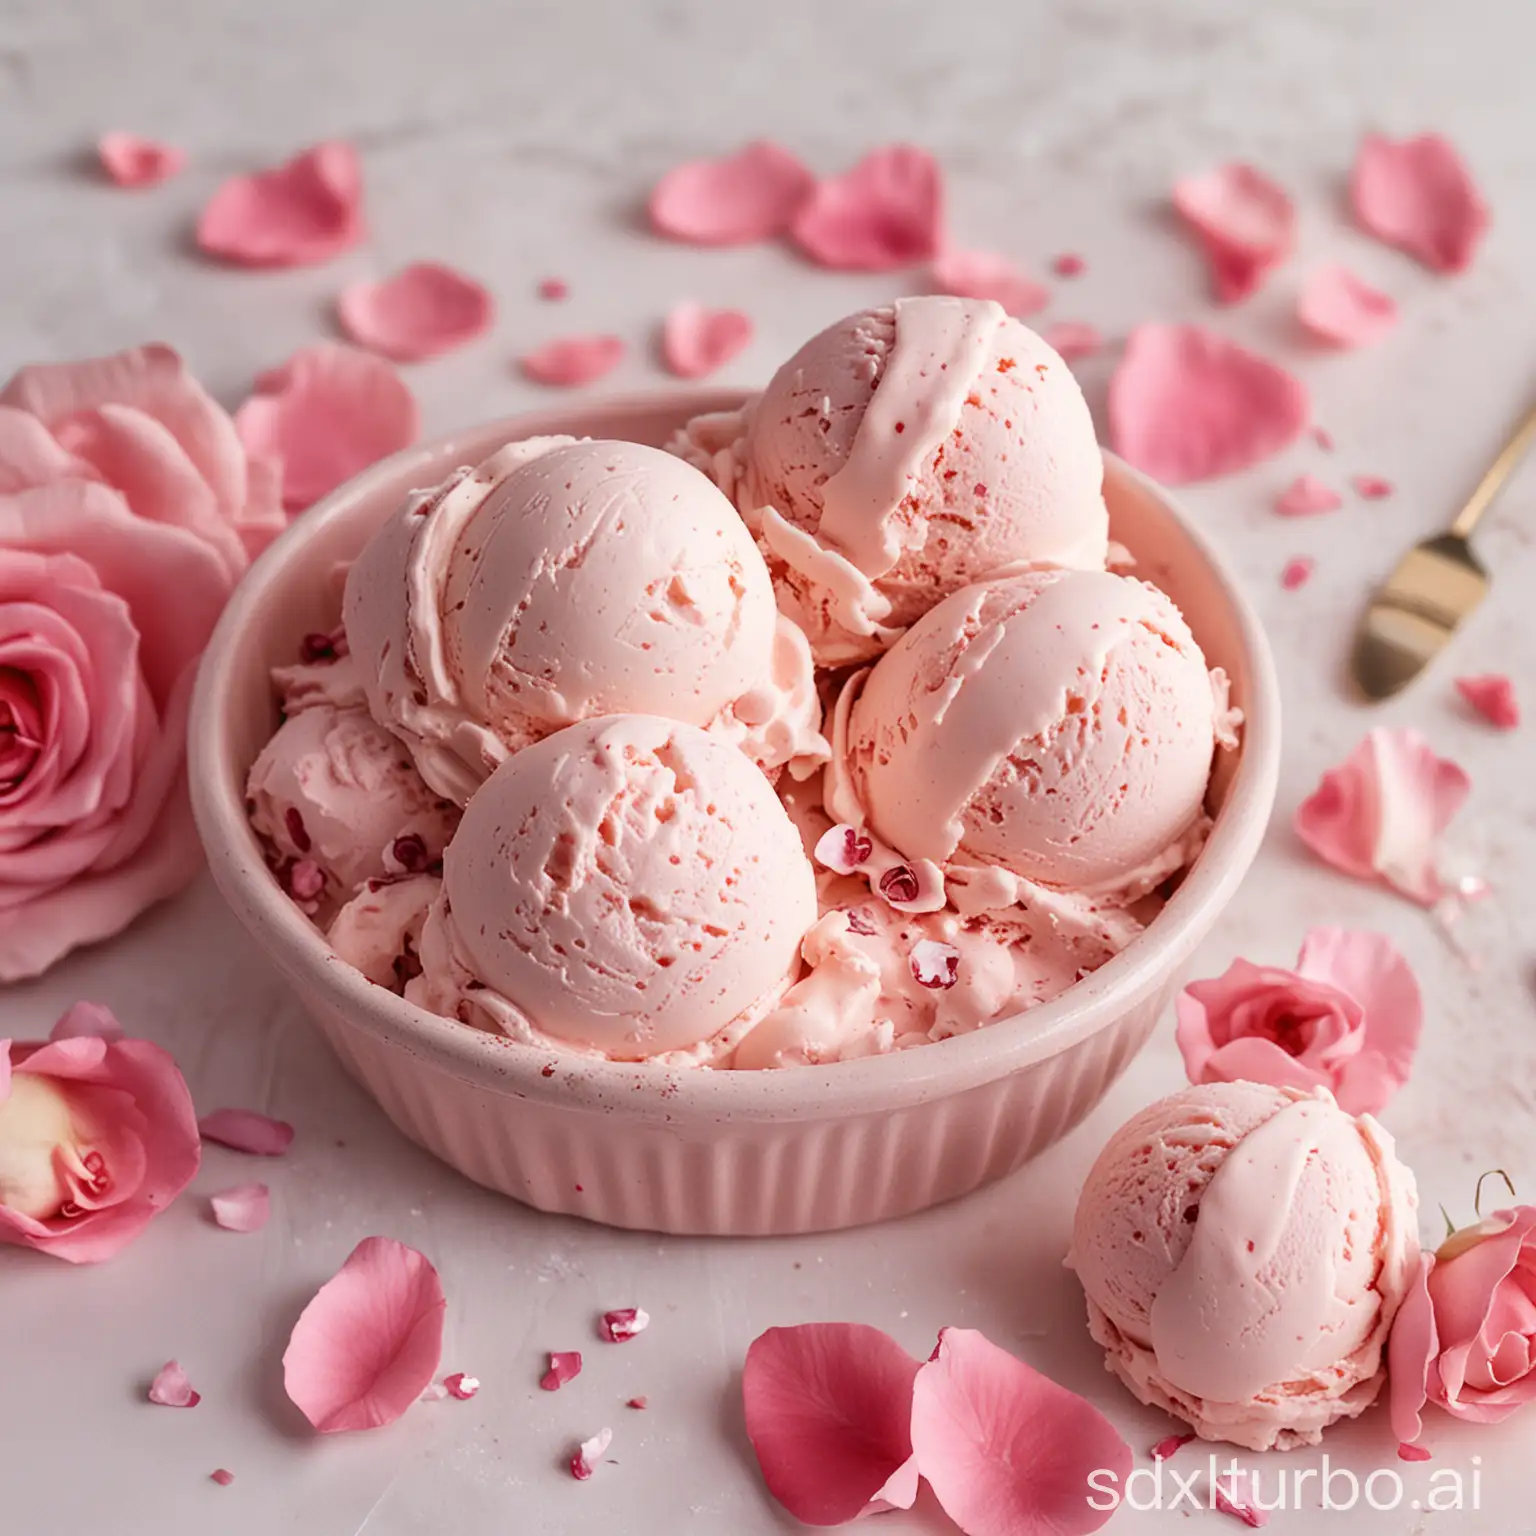 Delicate-Rose-Petal-Ice-Cream-Sweetness-and-Elegance-in-Every-Spoonful